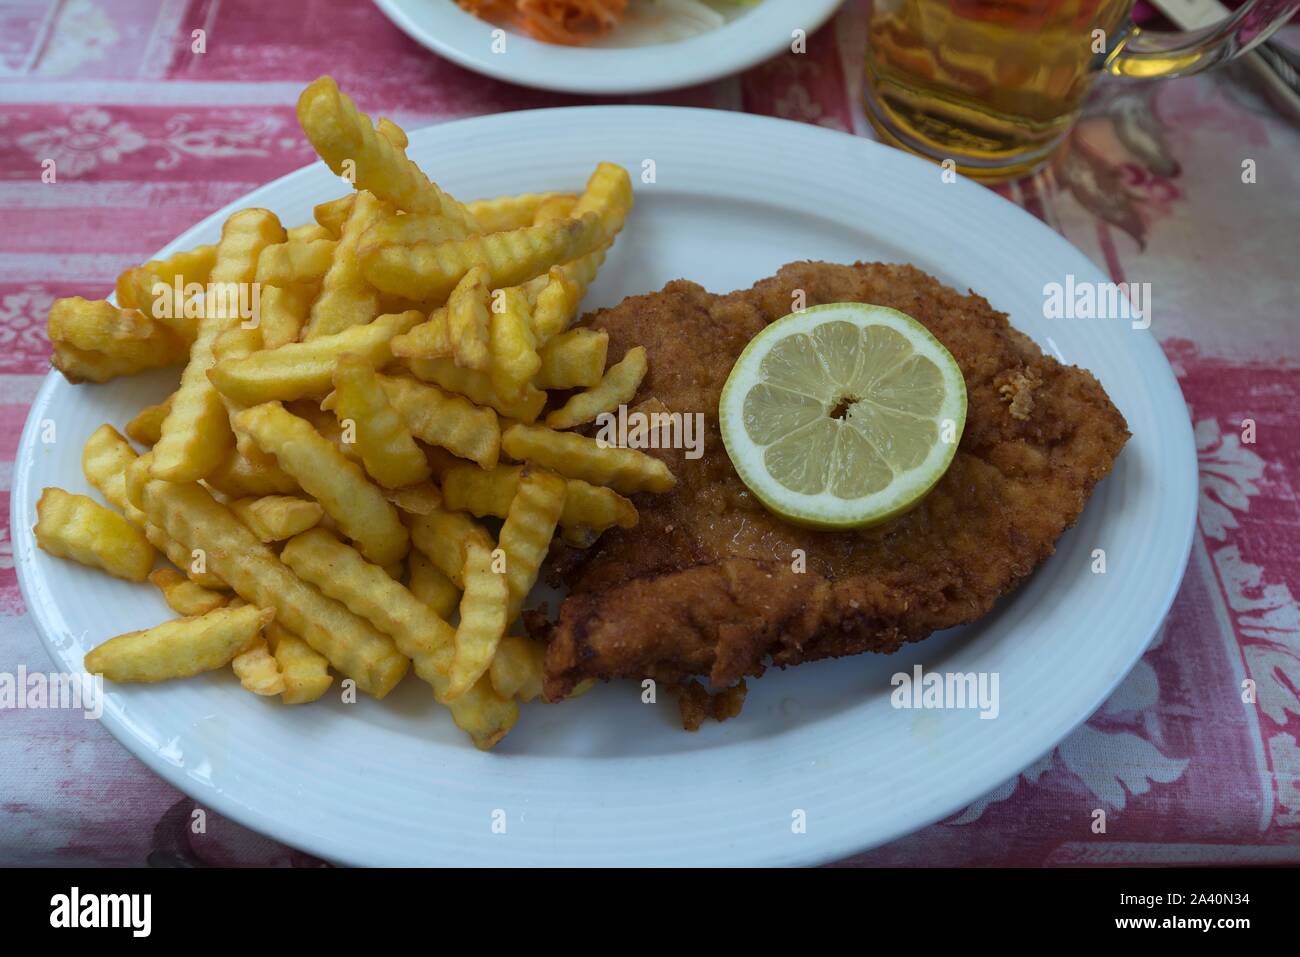 Schnitzel with French fries on a plate, Bavaria, Germany Stock Photo